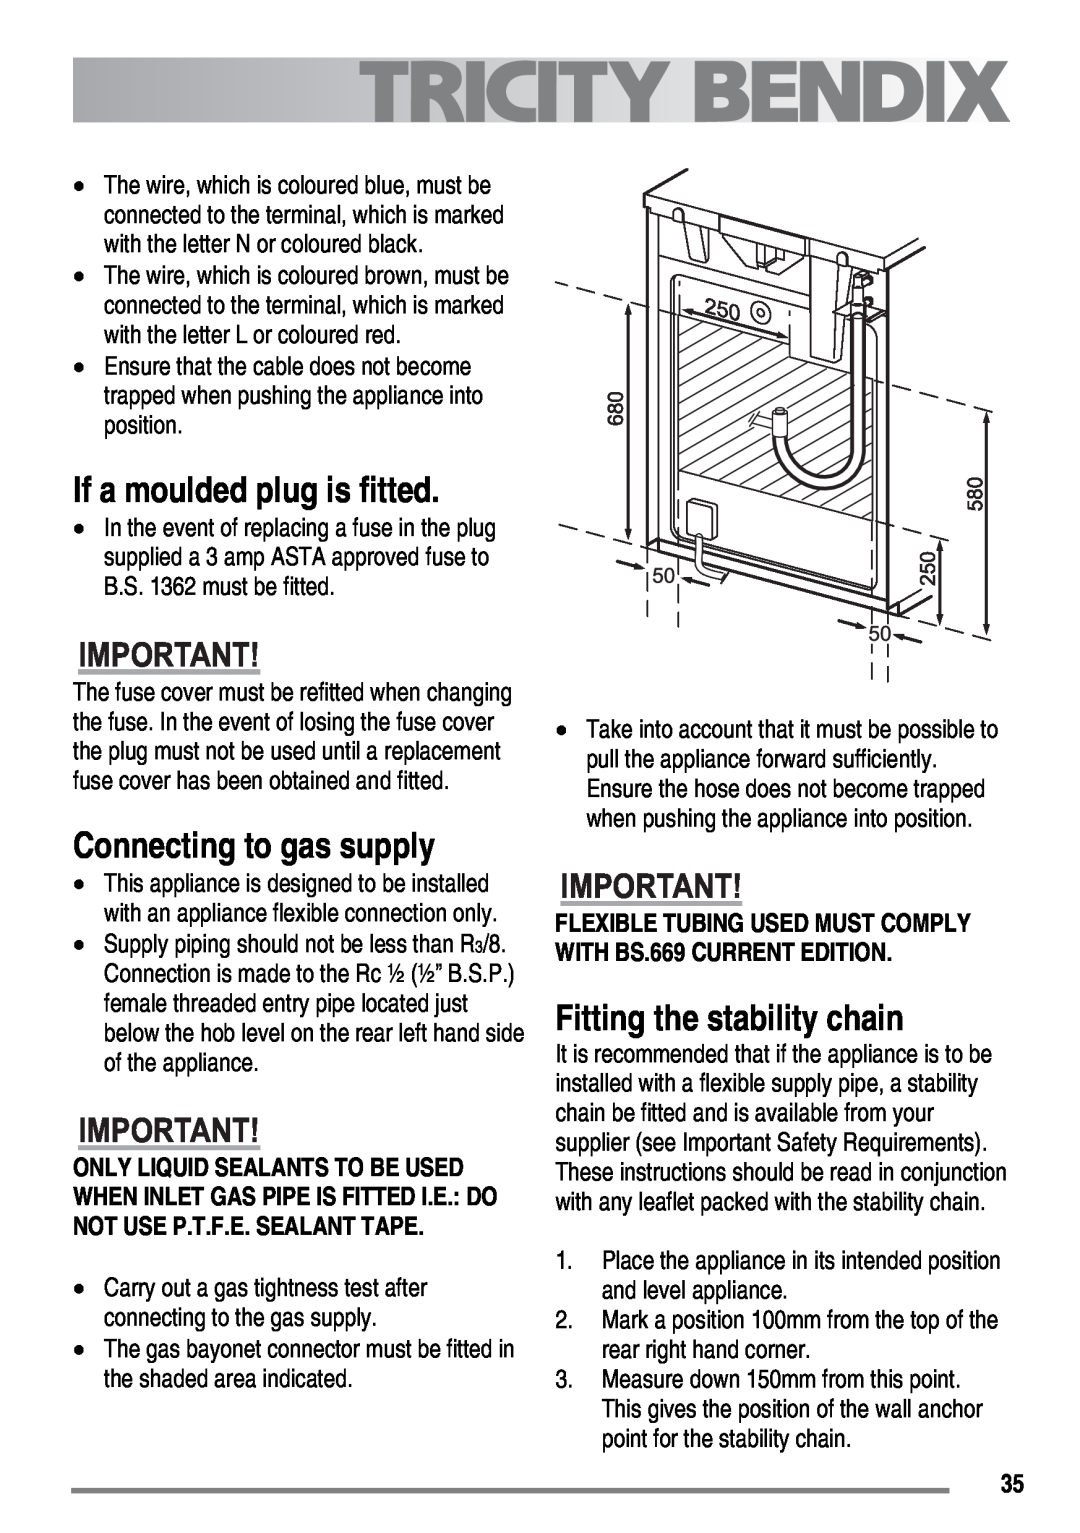 Tricity Bendix SG558/1 user manual If a moulded plug is fitted, Connecting to gas supply, Fitting the stability chain 